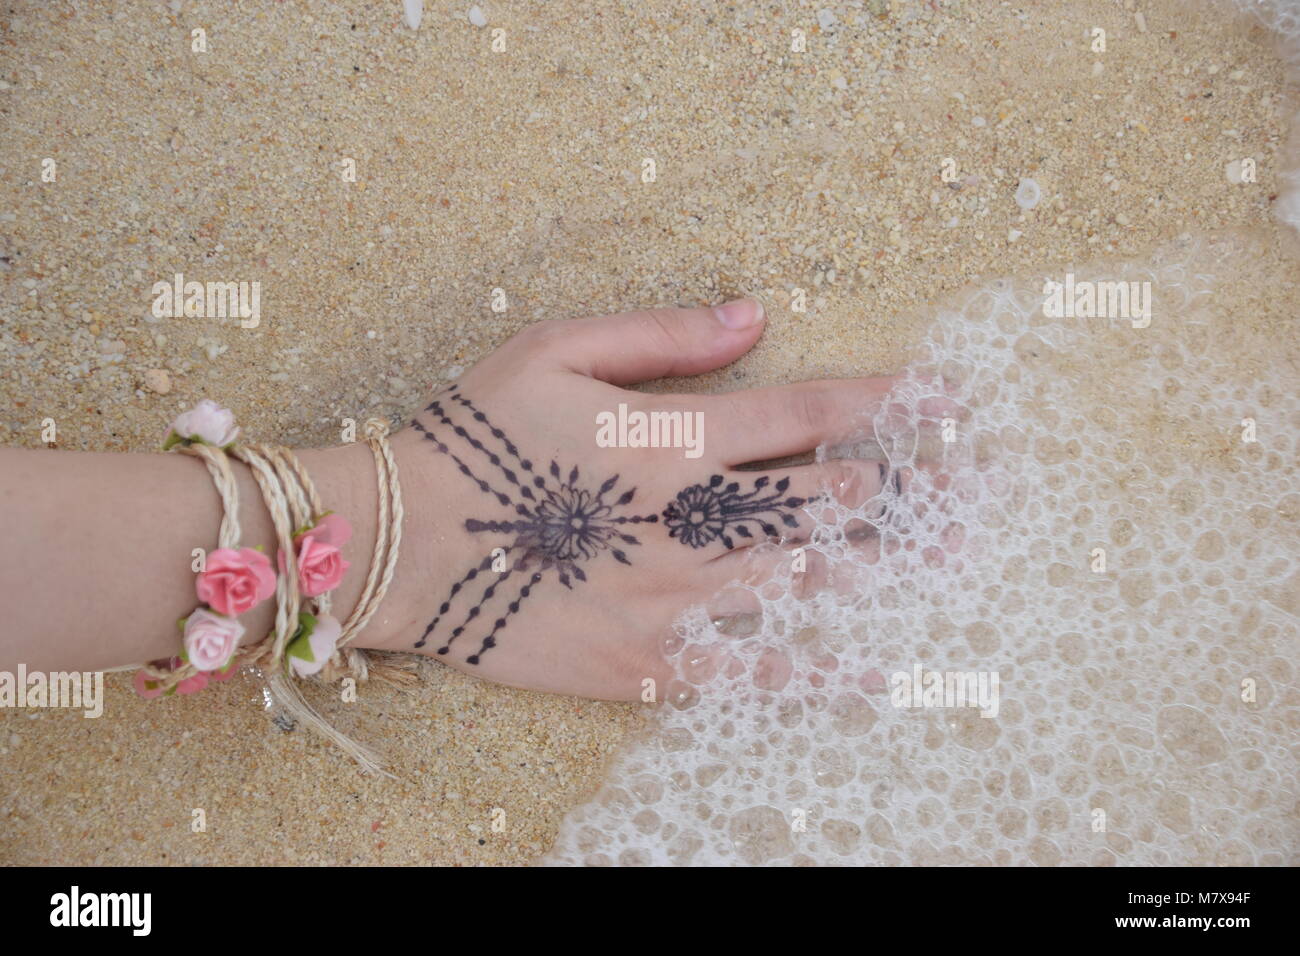 Nothing is more relaxing than feeling the sands and water, It is always good to connect to the mother earth! Stock Photo